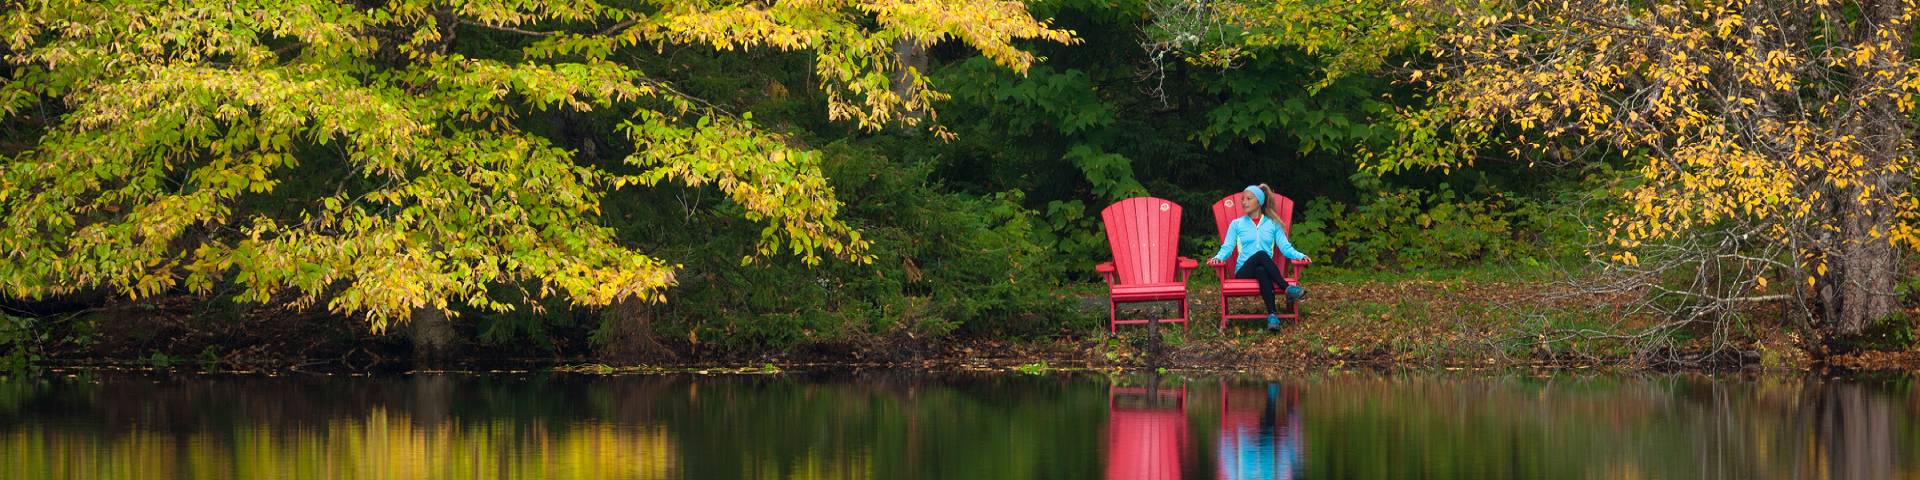 A person sitting in a red chair next to a lake